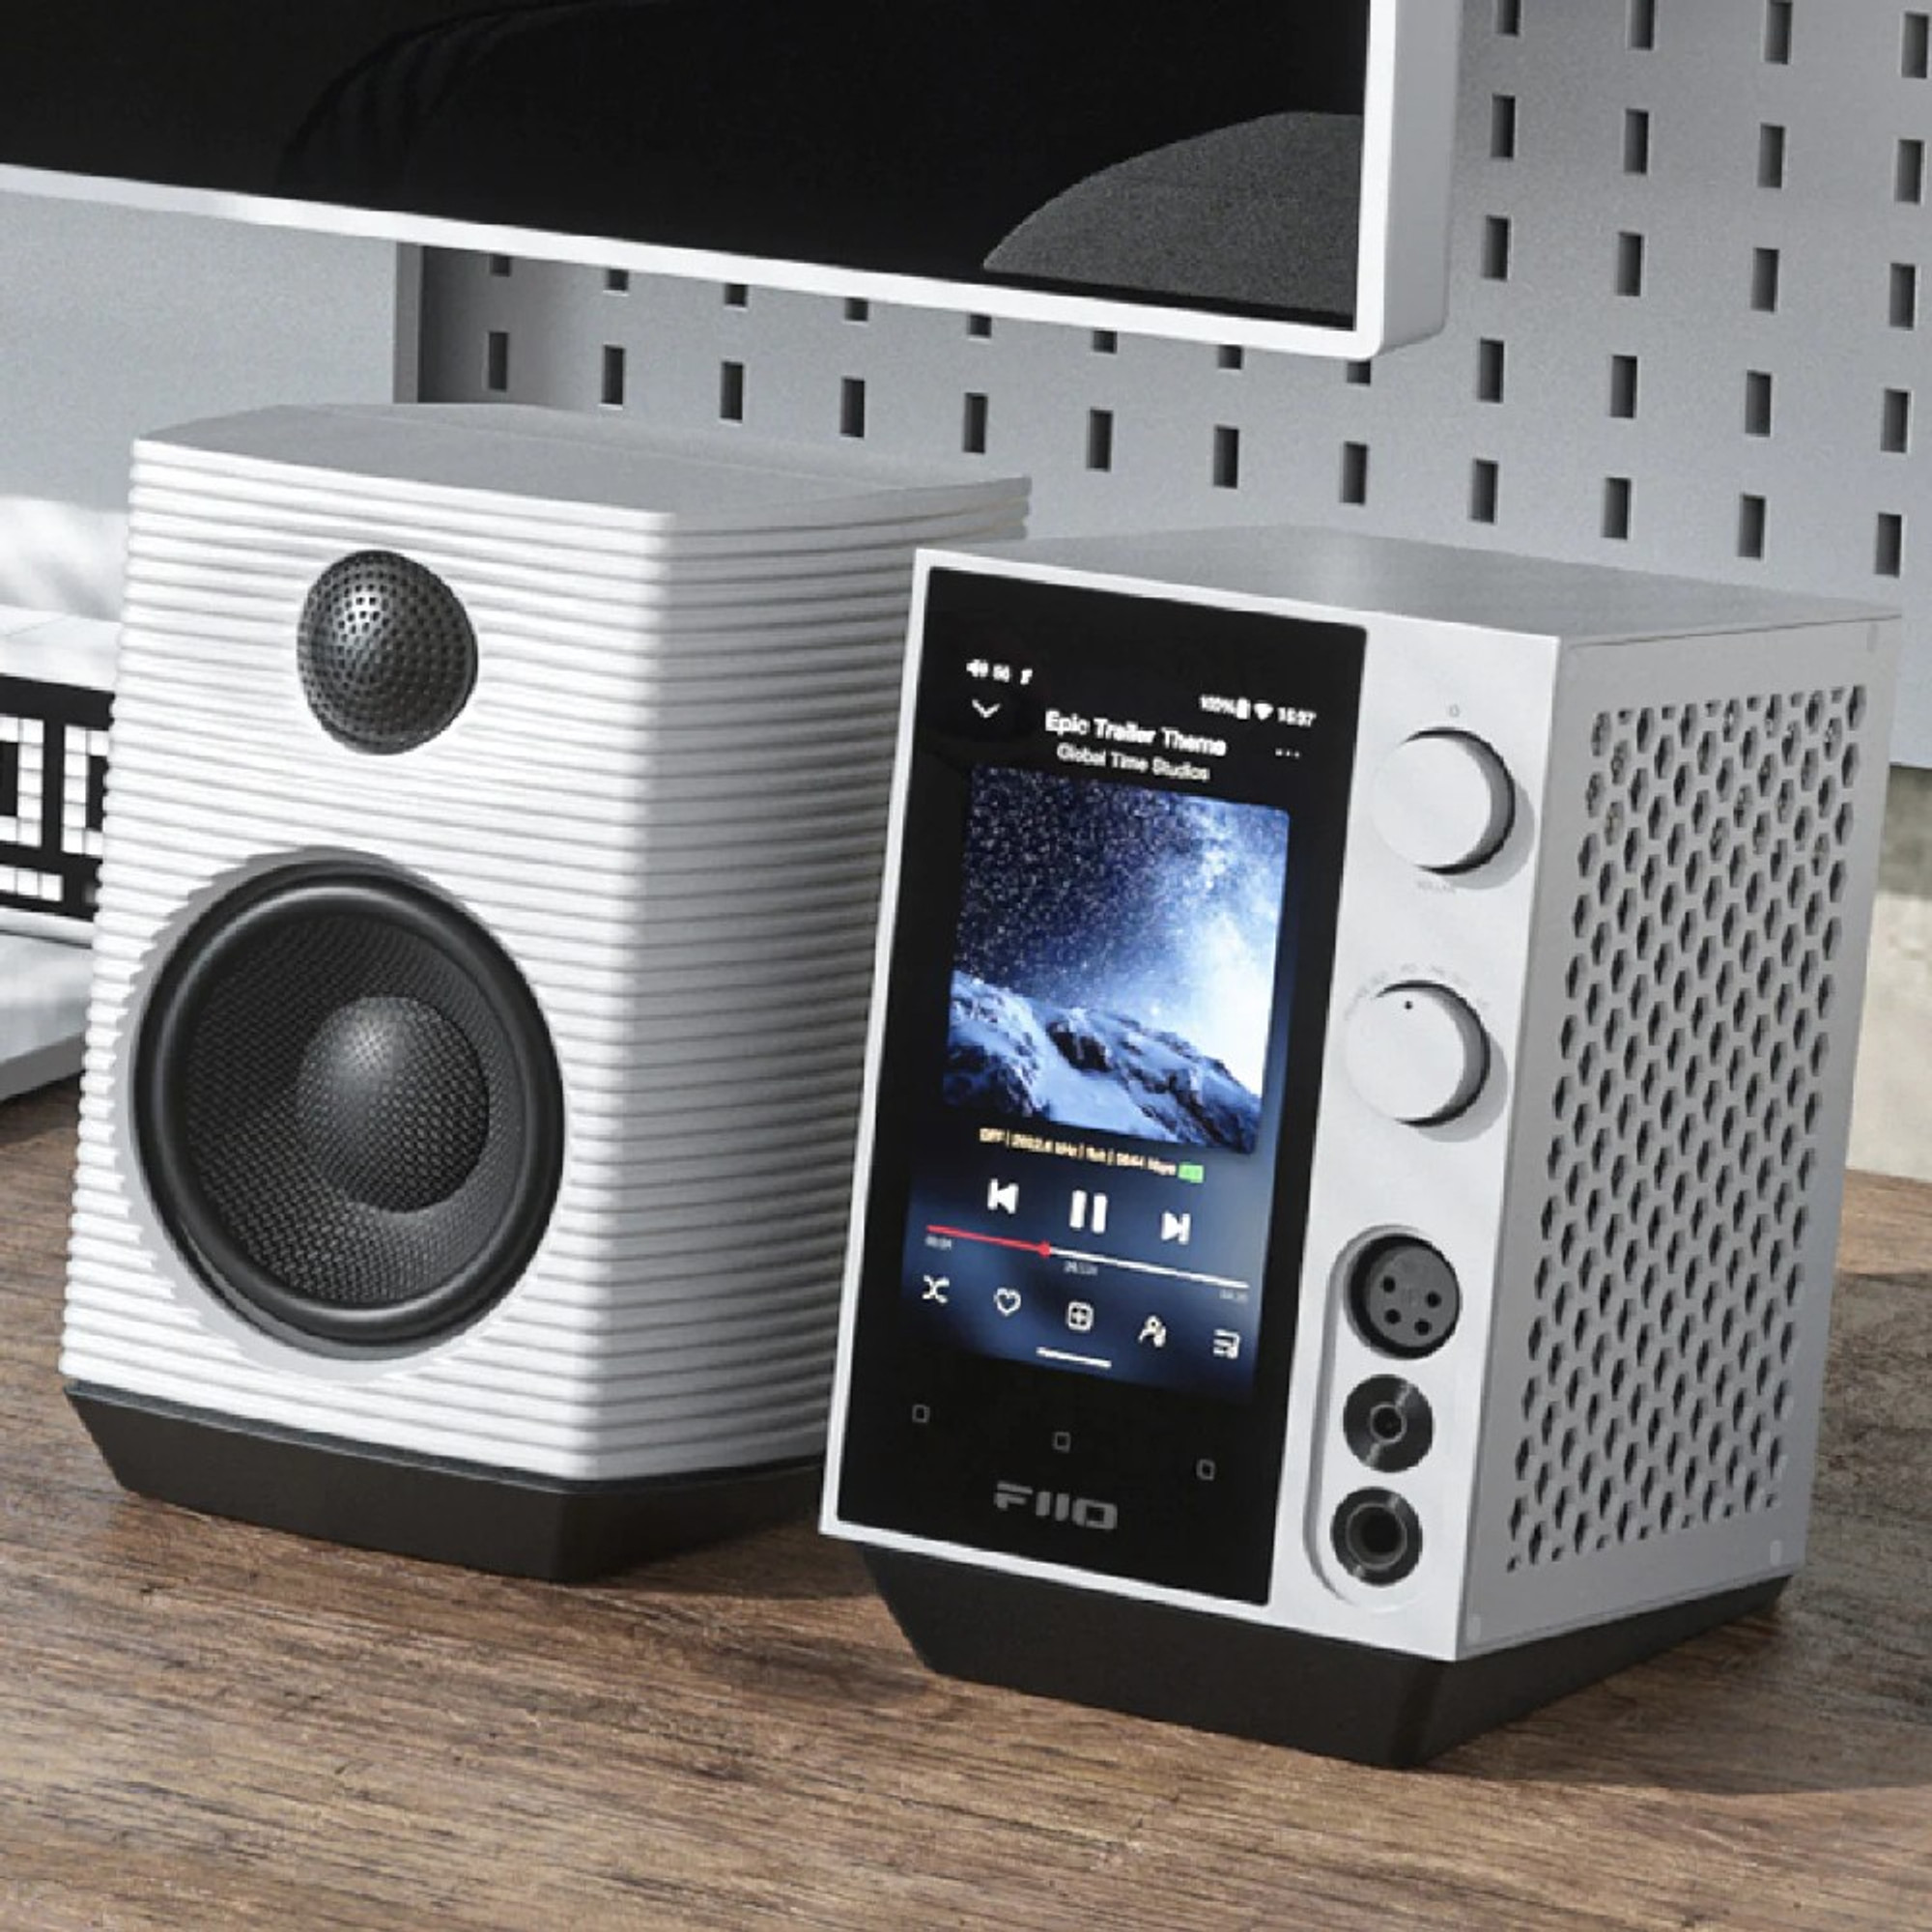 Fiio R7 Snapdragon 660 Desktop Android 10 Hifi Streaming Music Player With  Bluetooth 5.0 - Black - Zorro Sounds